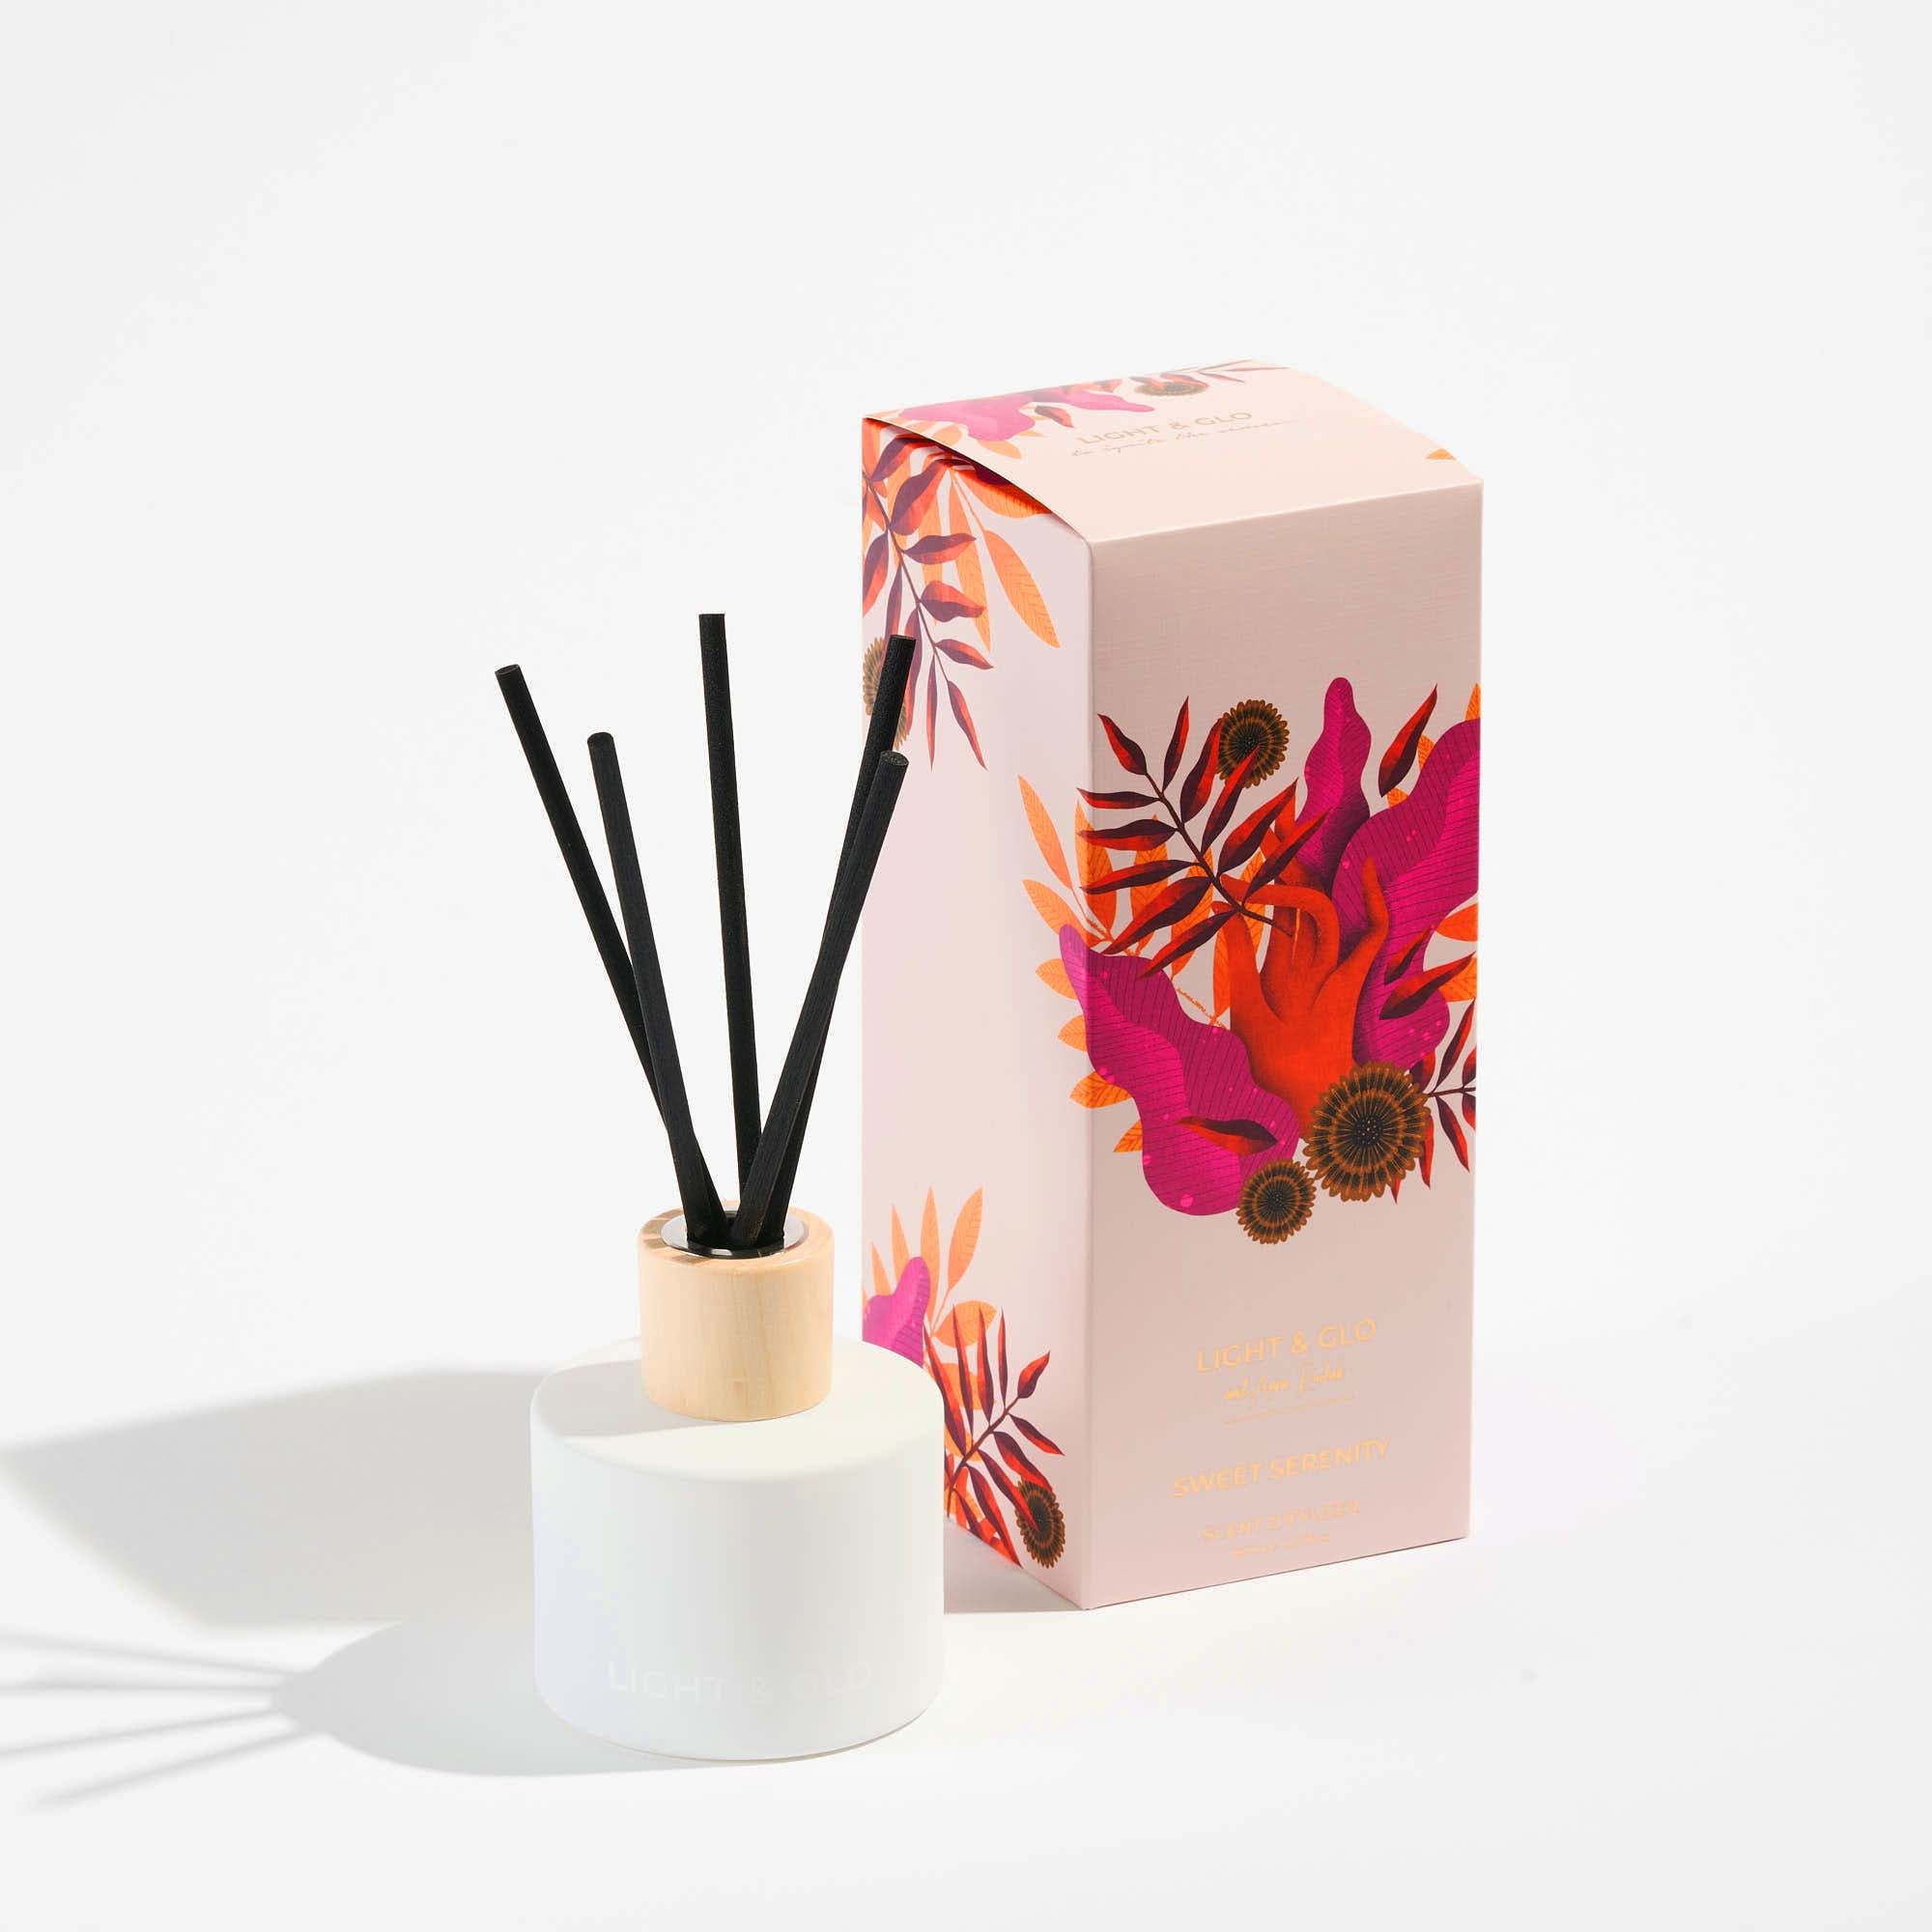 Artist Scent Diffuser - Sweet Serenity | Luxury Candles & Home Fragrances by Light + Glo